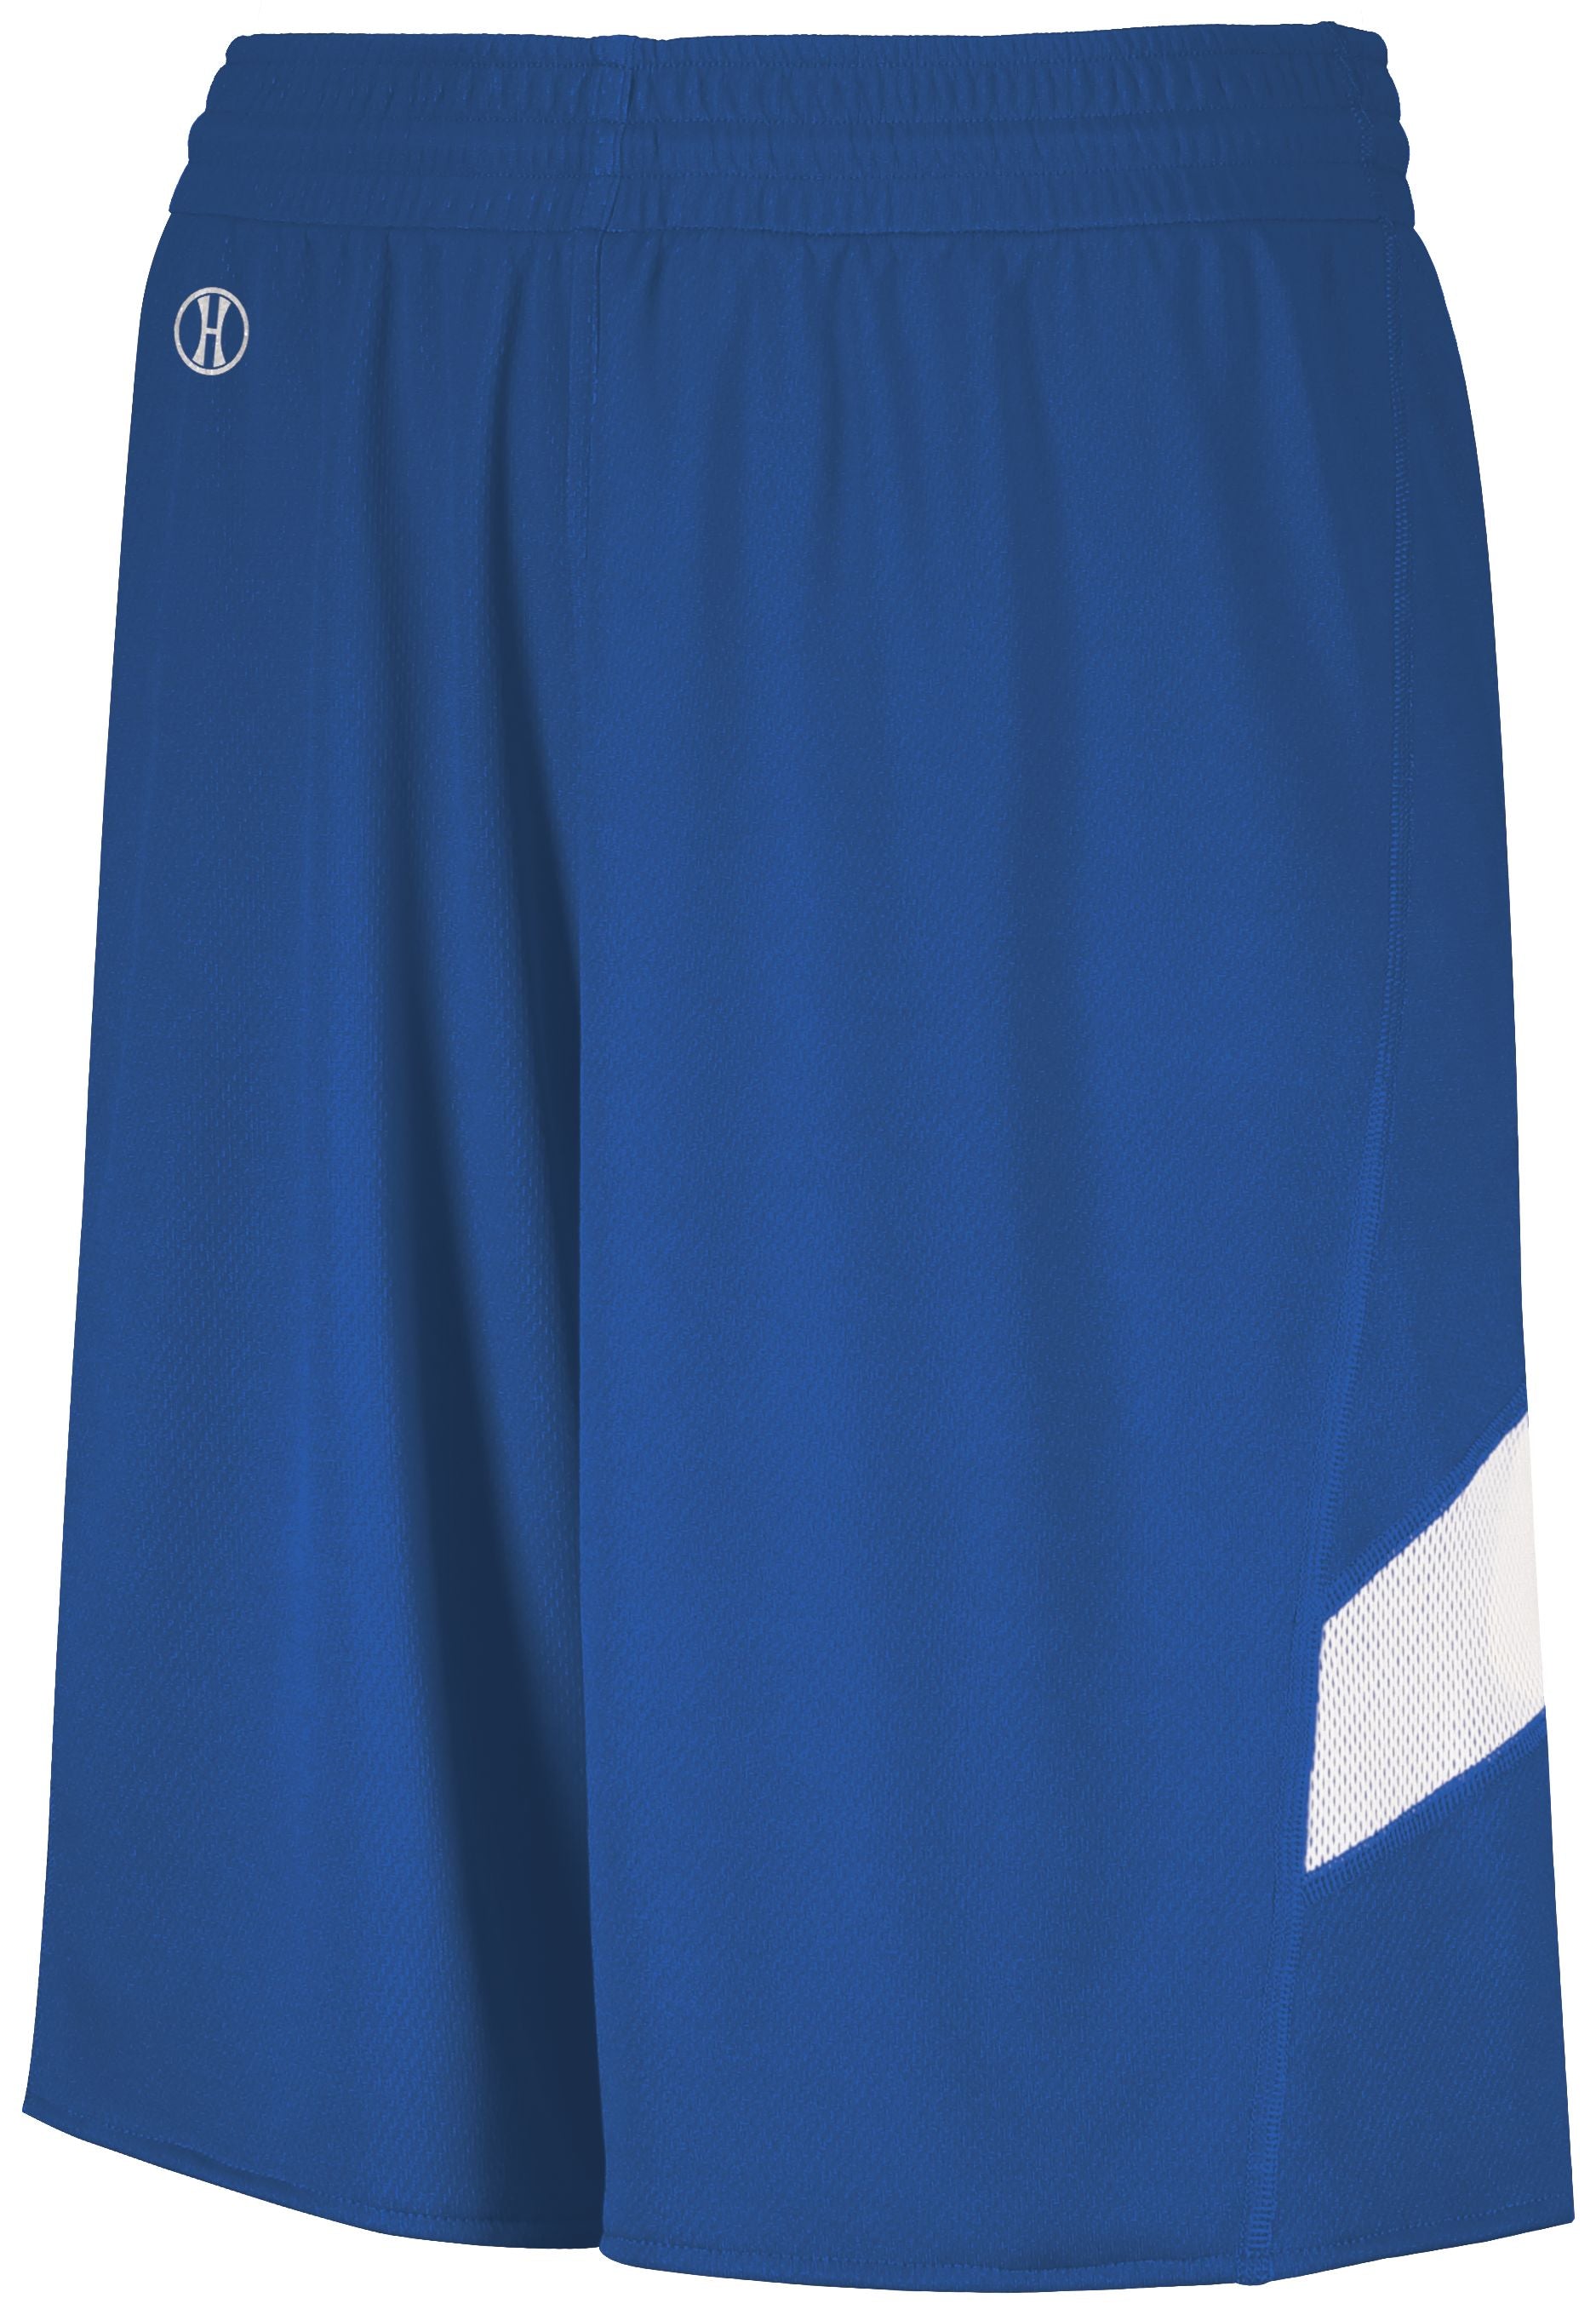 Holloway Youth Dual-Side Single Ply Basketball Shorts in Royal/White  -Part of the Youth, Youth-Shorts, Basketball, Holloway, All-Sports, All-Sports-1 product lines at KanaleyCreations.com